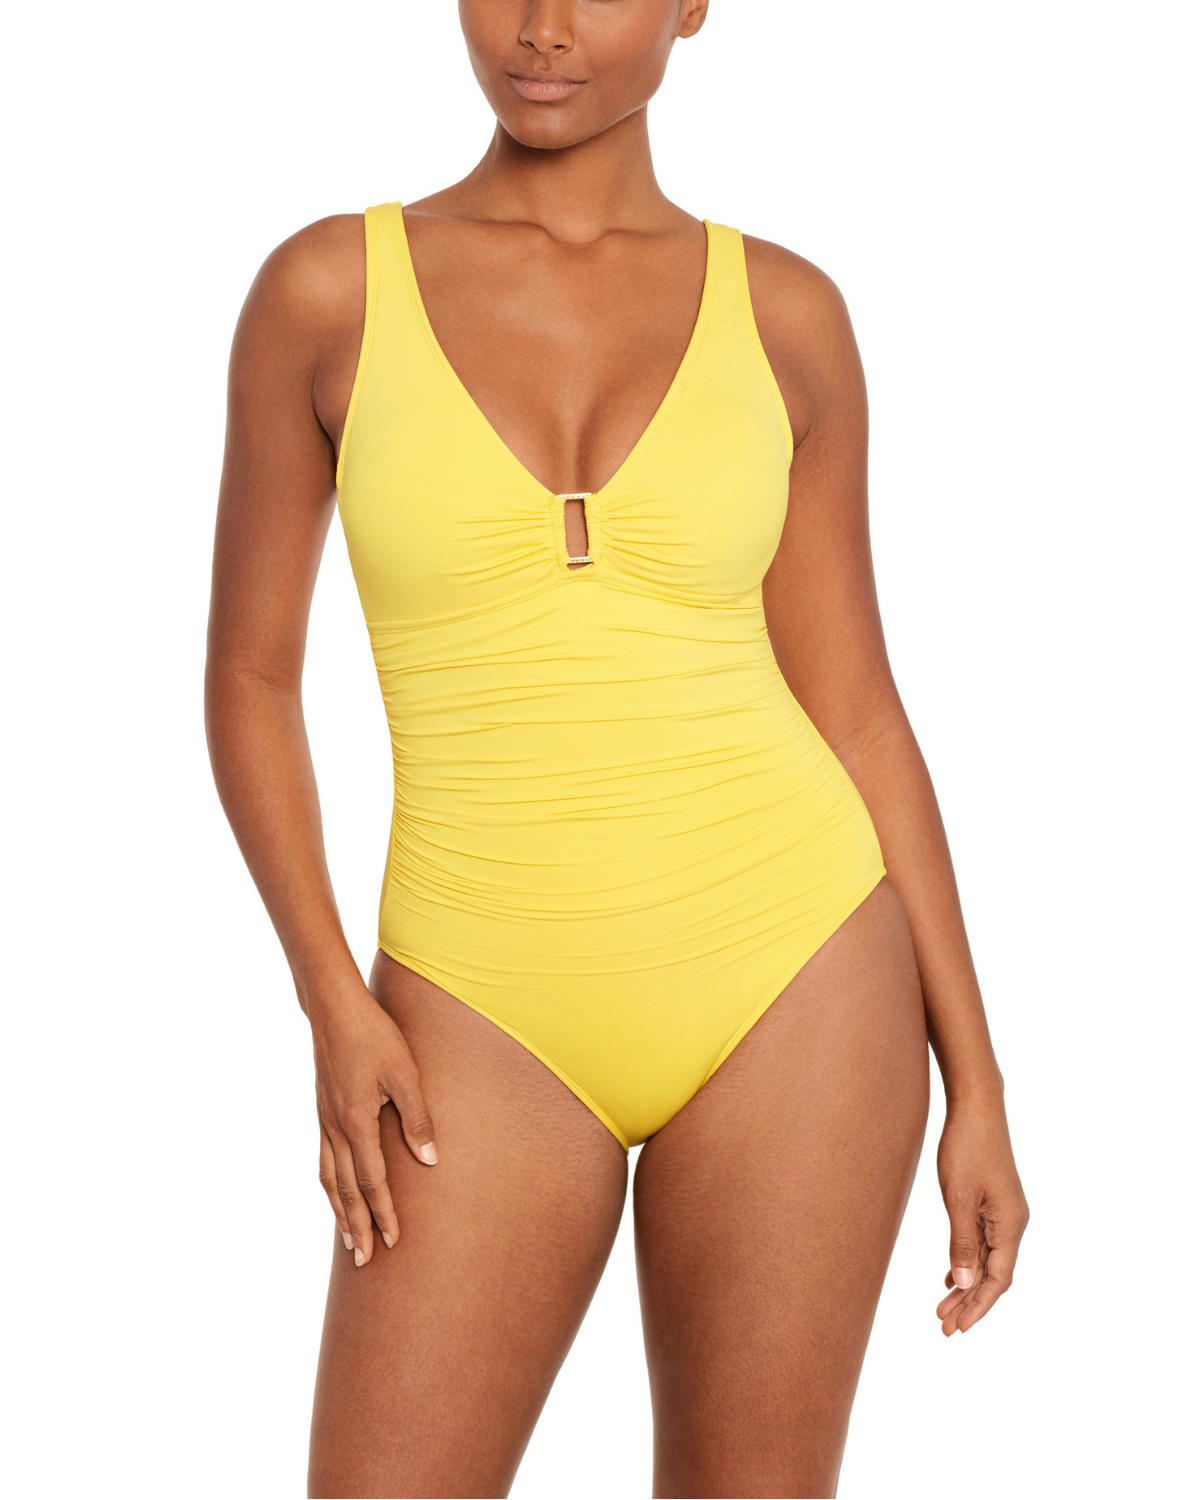 Model wearing a v-neck one piece with a ring detail and shirred torso in yellow